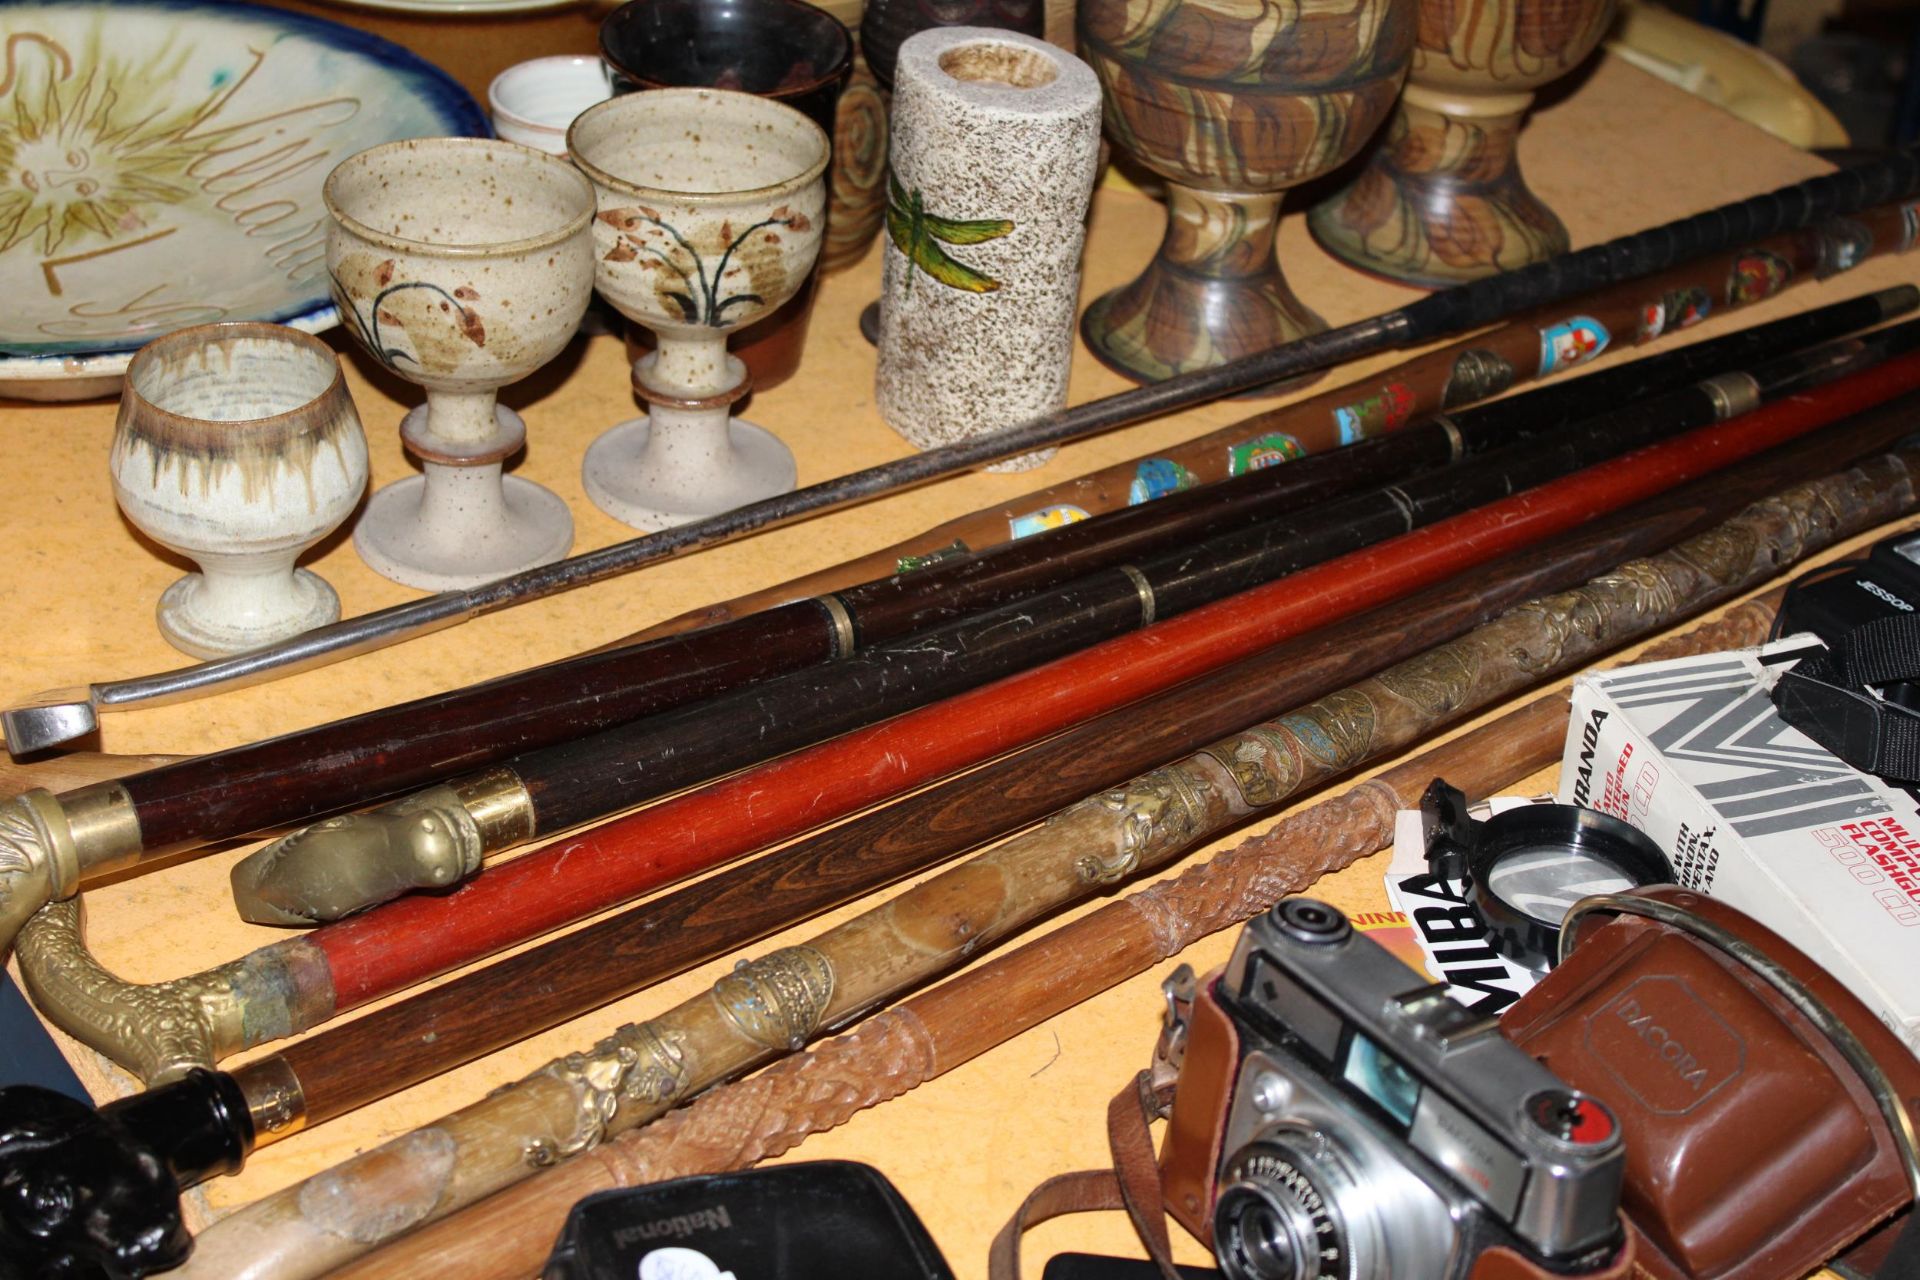 SEVEN VINTAGE WALKING STICKS, TWO WITH BRASS HORSES HEAD HANDLES, ONE WITH A BLACK LABRADOR - Image 4 of 5